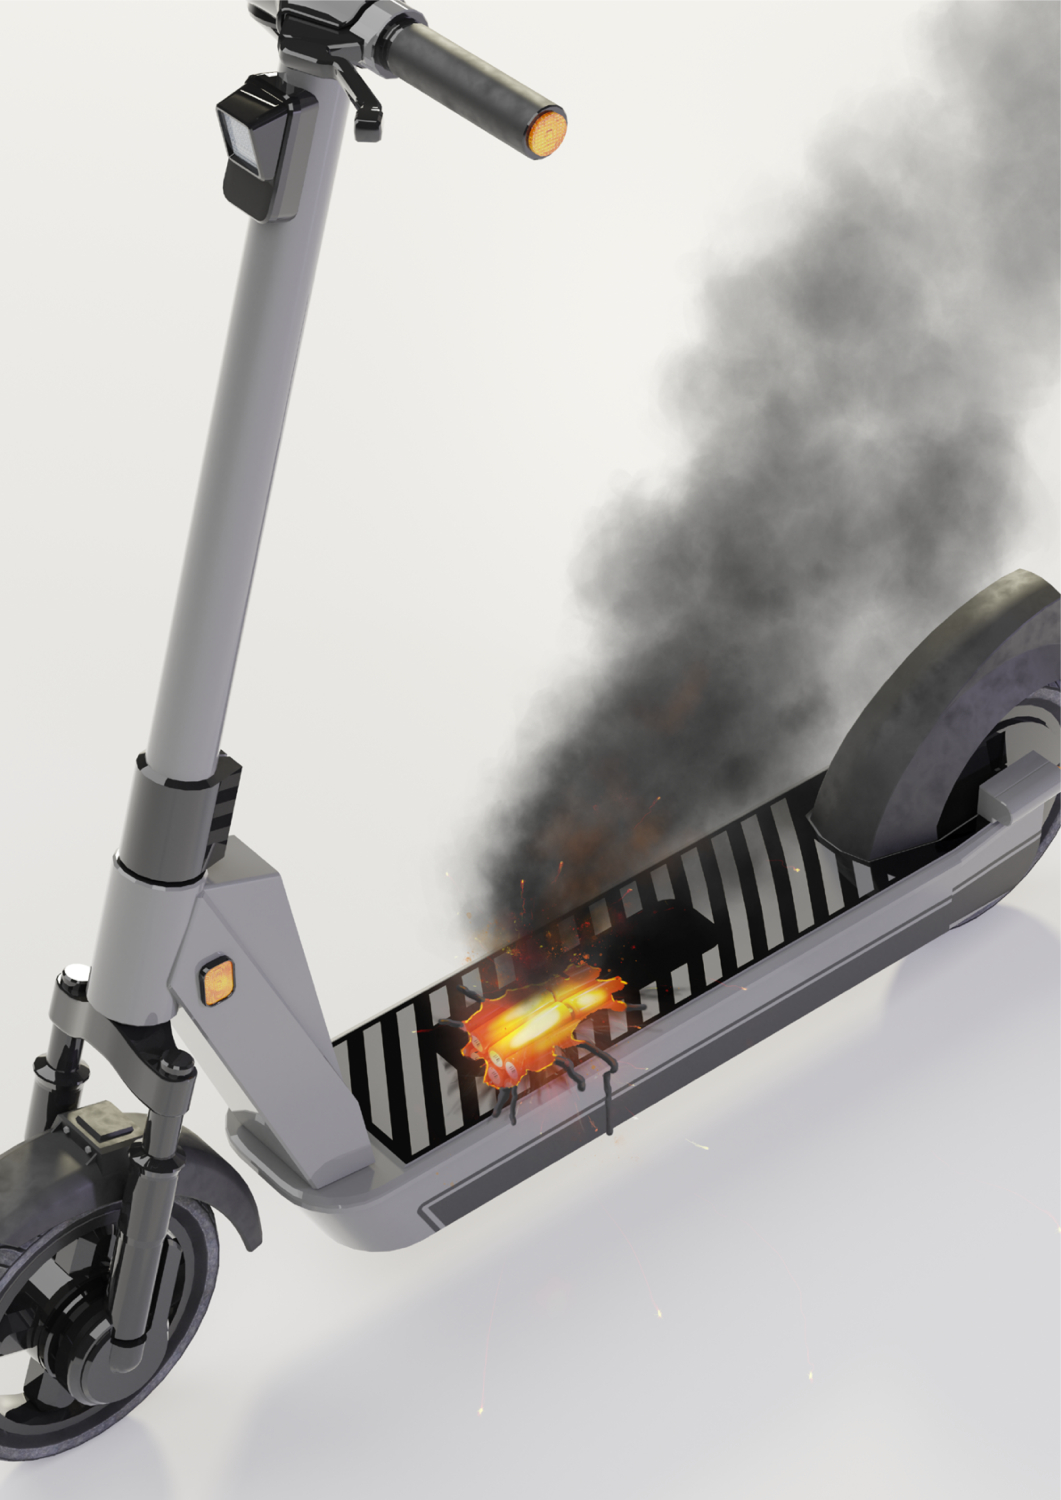 image of electric scooter with battery on fire